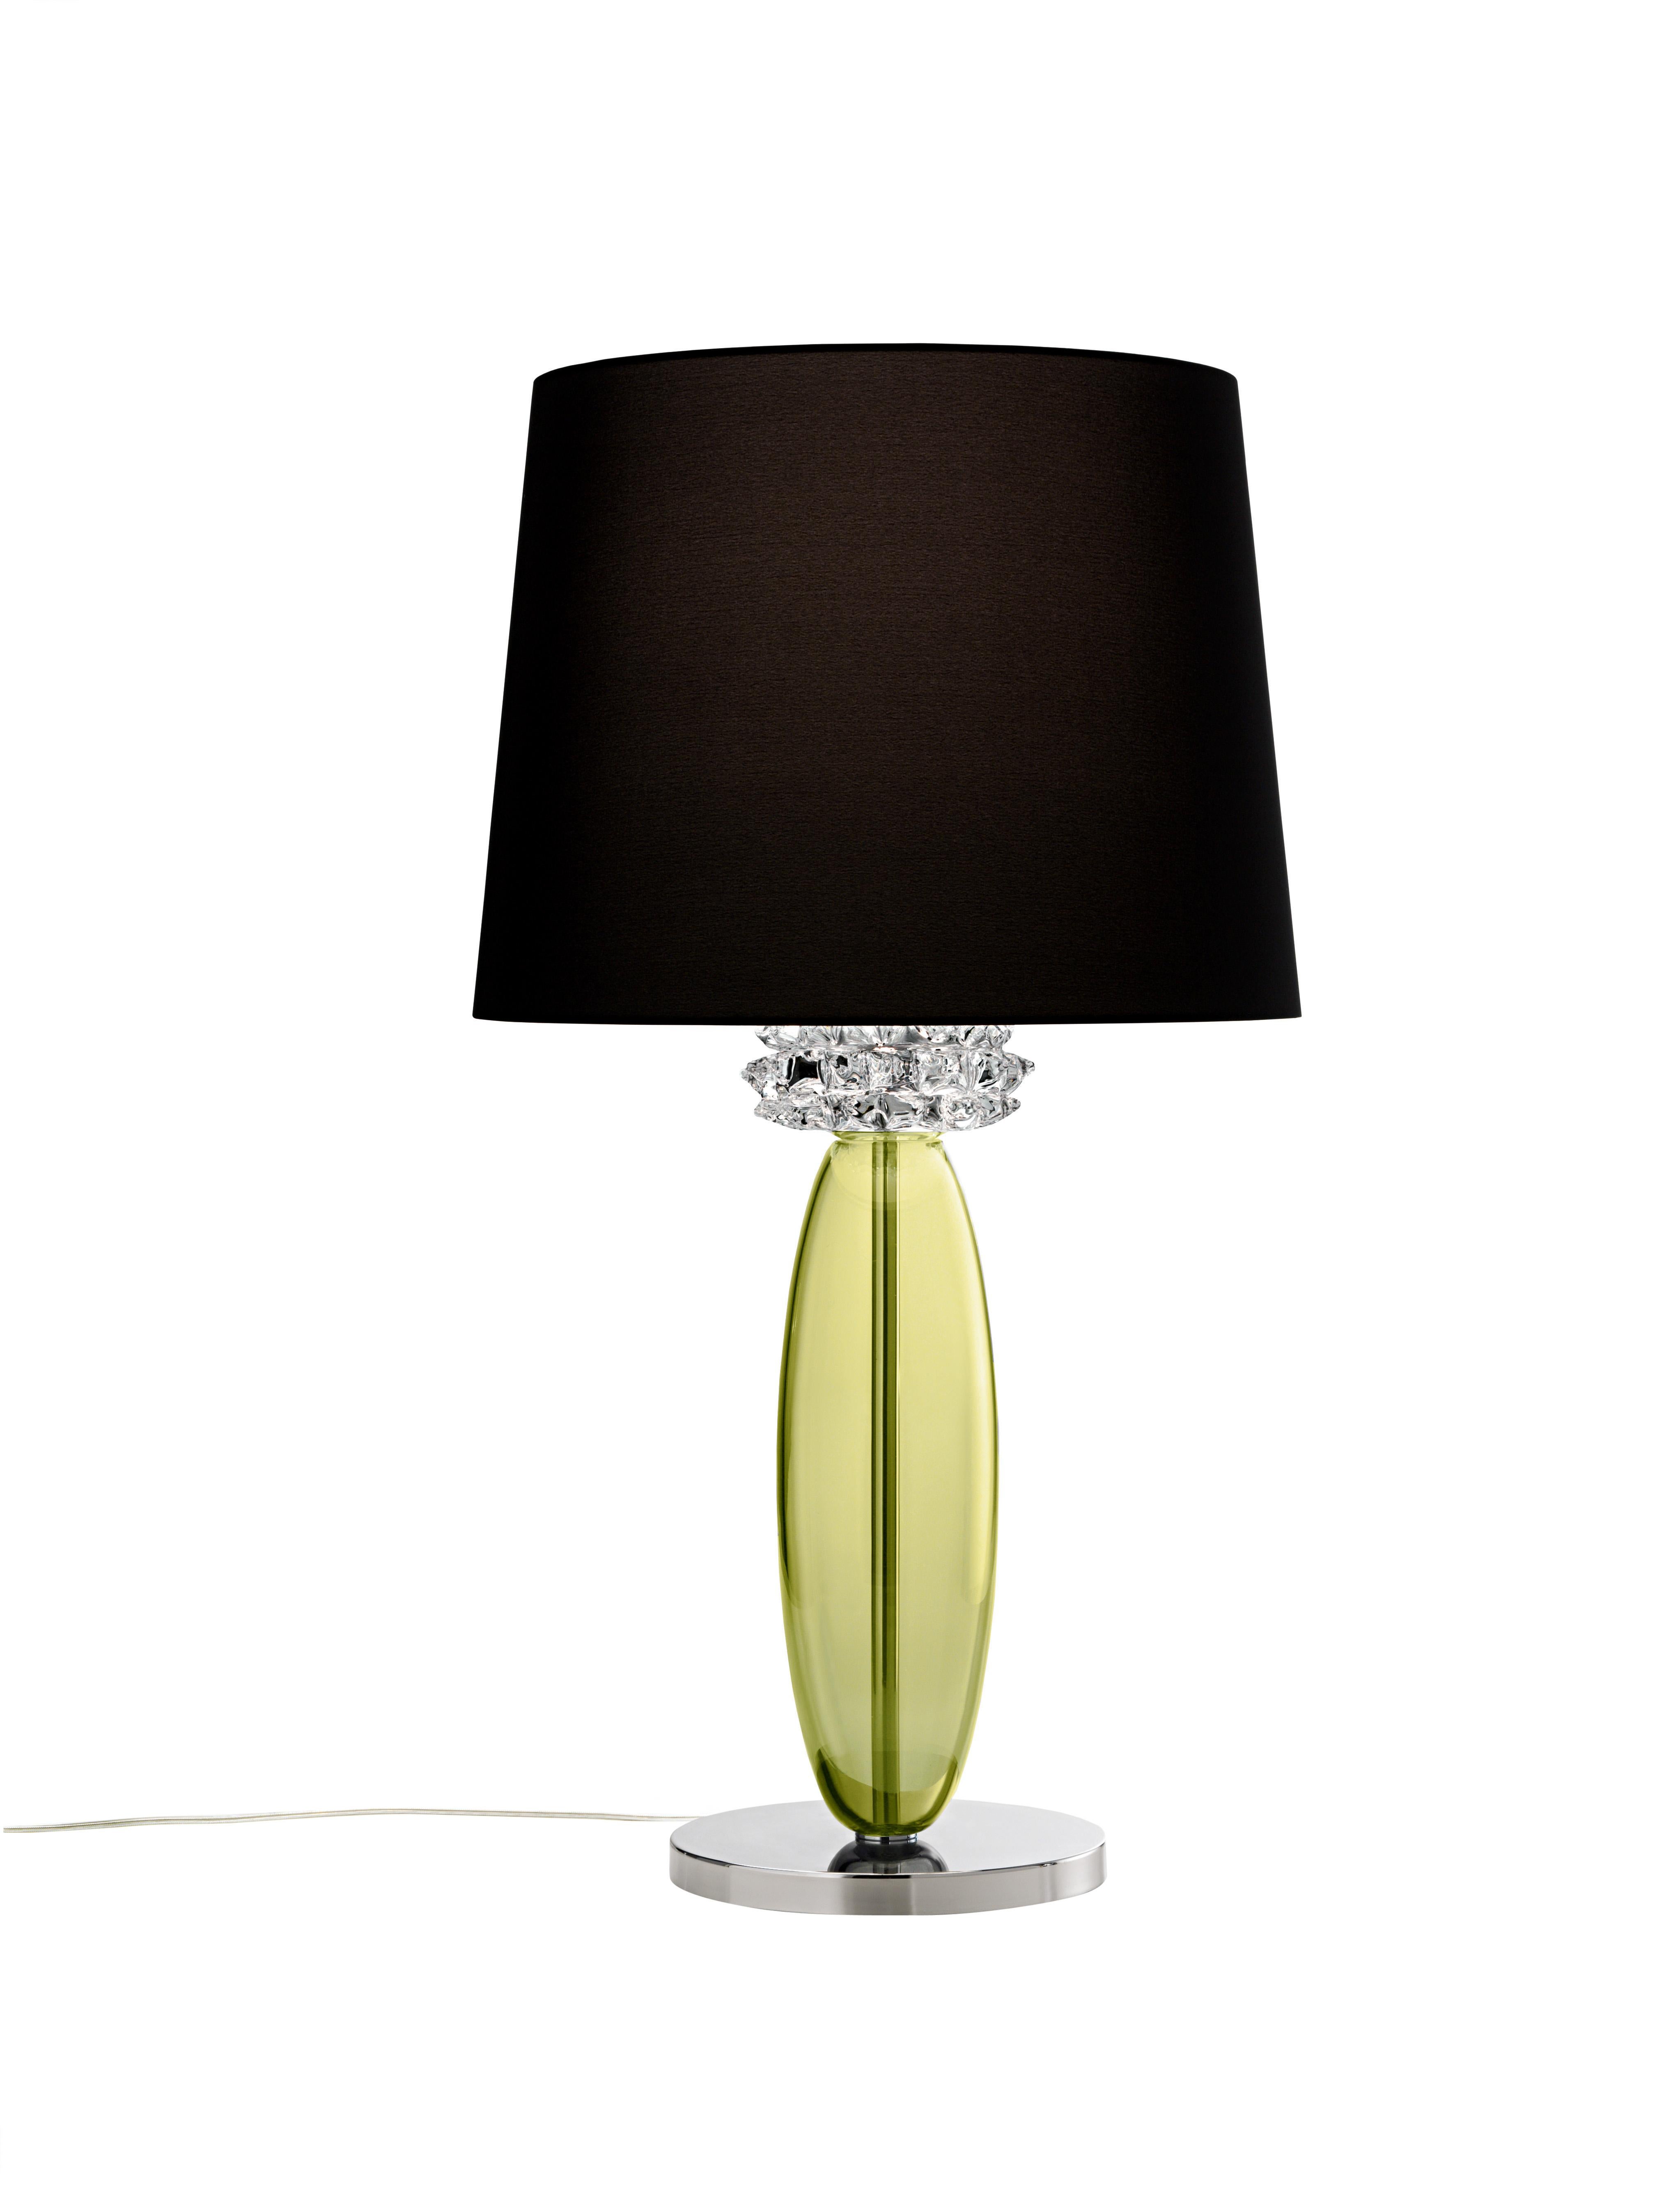 Green (Liquid Citron_EL) Rotterdam 5565 Table Lamp in Glass with Black Shade, by Barovier&Toso